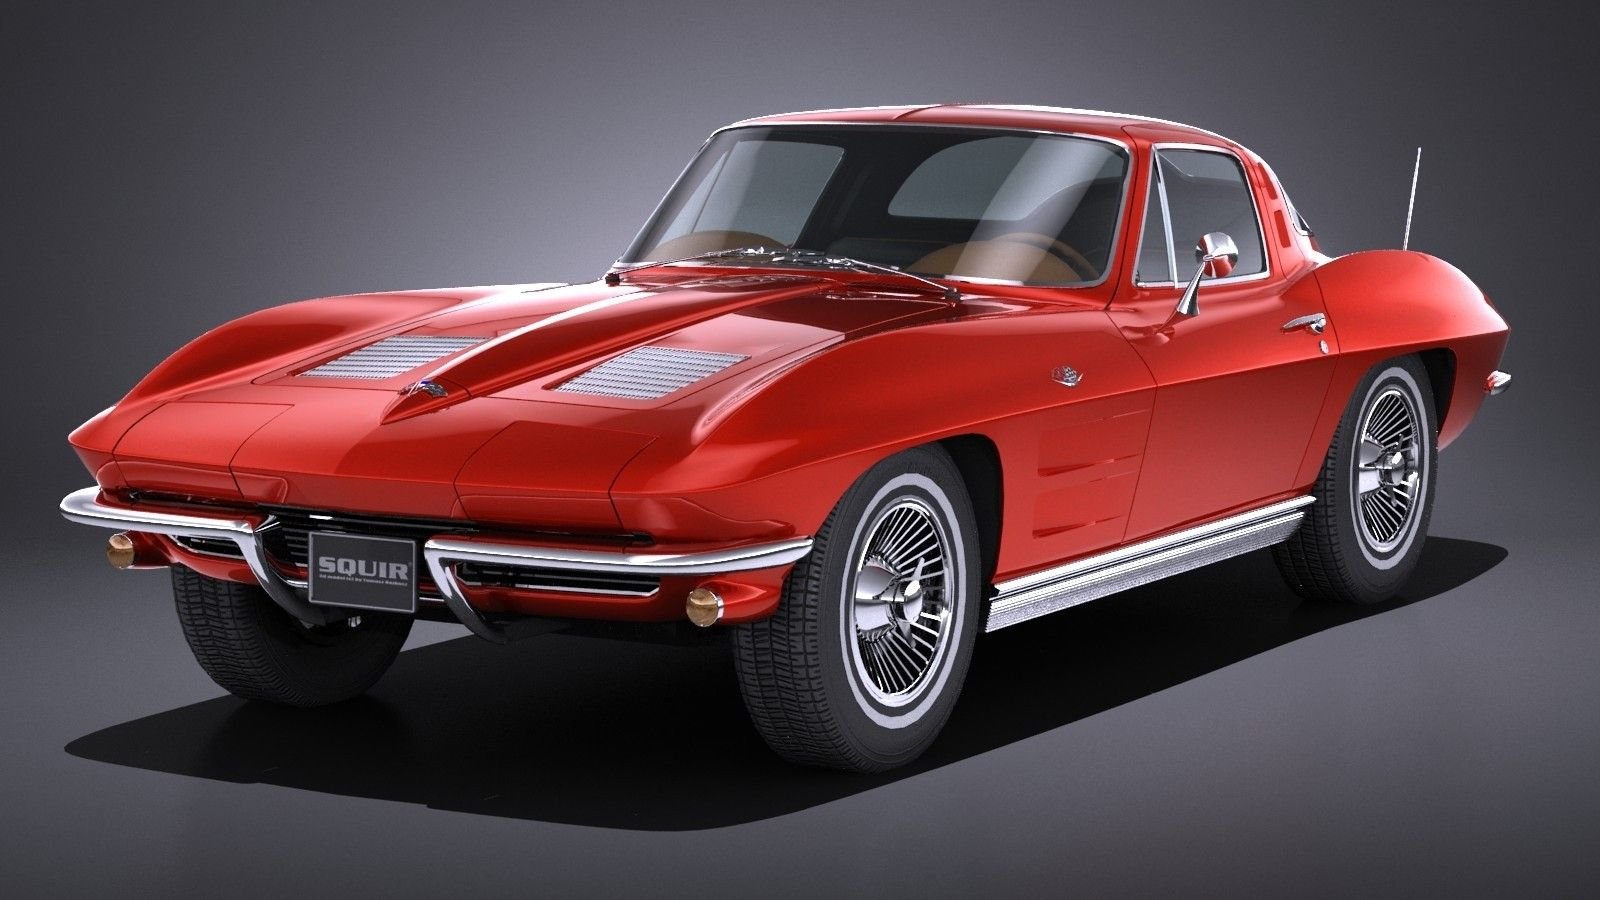 The 1963 Chevrolet Corvette Sting Ray Coupe Is One Of The Greatest American Designs